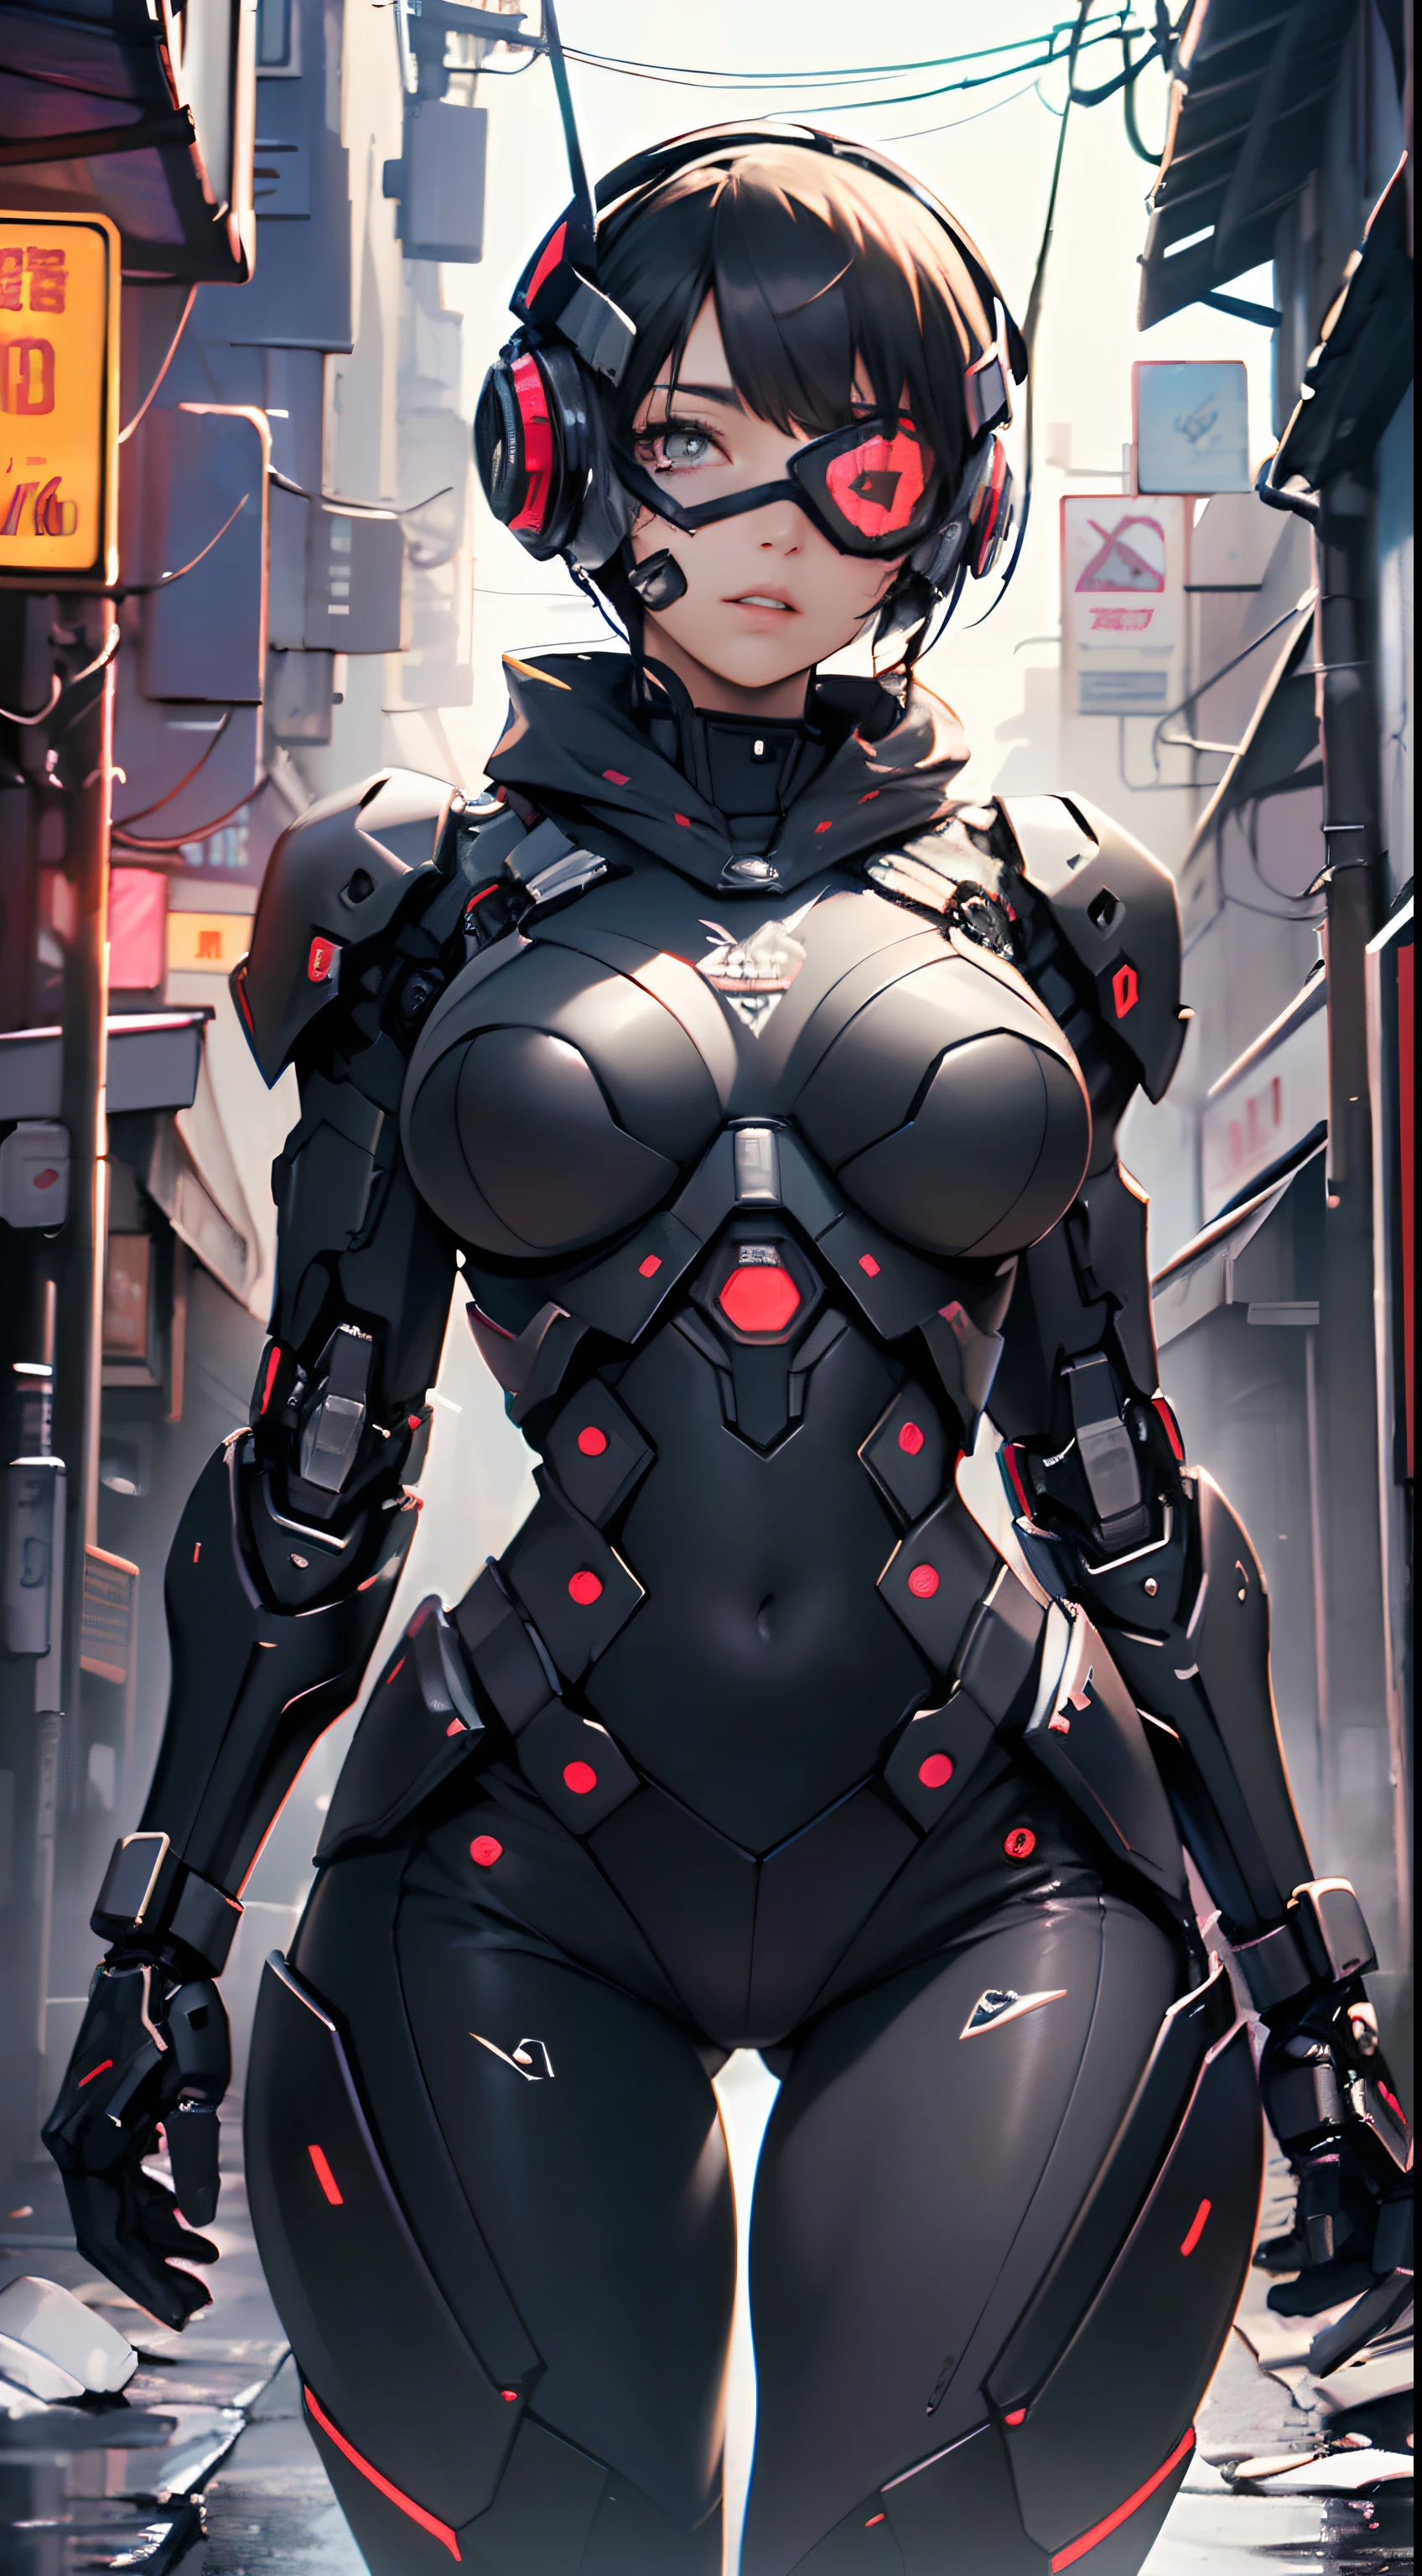 assaultron, itrobo2022, 1girl, solo, breasts:1.4, looking at viewer, robot, humanoid robot, robot joints, one-eyed, joints, no humans, ((black armor, black pants)), wide hips, curvy, mechanical arms, crotch plate, science fiction, post-apocalypse, outside, large breasts

lot of rgb,(spider lower abdomen),

(((nsfw))),

motorcycle black helmet,(wearing head-mounted display that is chunky and hi-tech with neon lights:1.2), corporate logos,complete helmet,no face,black body,black skin,black robotic body,((((technological face mask,Cybernetic_Jawless, mask)))),

(dynamic pose:1.0),solo focus,embarrassed,centered,scale to fit dimensions,Rule of thirds,

outdoors,((night view)),(cyberpunk night street Background: 1.5,dark sky,alleyway, alley,thick clouds,detailed background:1.25),

(best quality),(high resolution),(sharp focus),(ultra detailed),(extremely detailed),(extremely high quality artwork),8k_wallpaper,(extremely detailed CG 8k),(very fine 8K CG),((hyper super ultra detailed perfect piece)),flawless,(((masterpiece))),illustration,vibrant colors,(intricate),High contrast,Selective lighting,Double exposure,HDR (High Dynamic Range),Post-processing,Background blur,